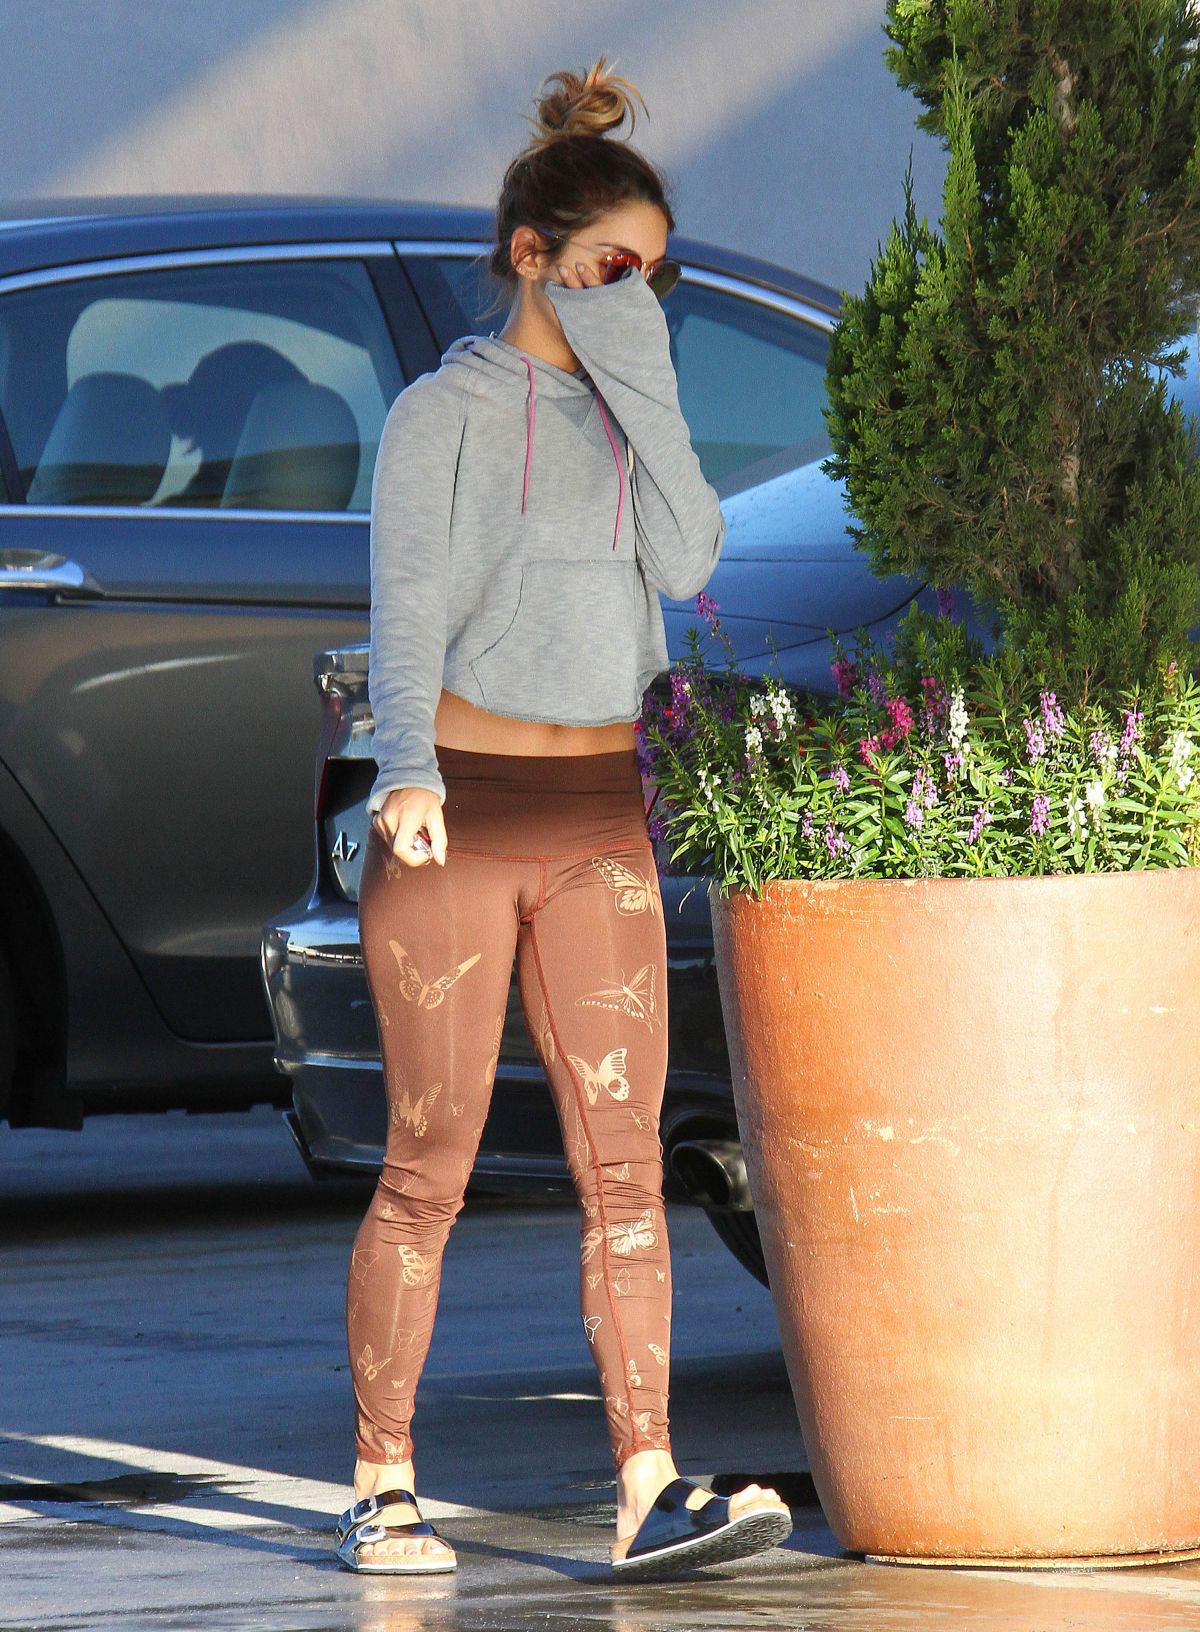 VANESSA HUDGENS in Tights Out and About in Los Angeles.